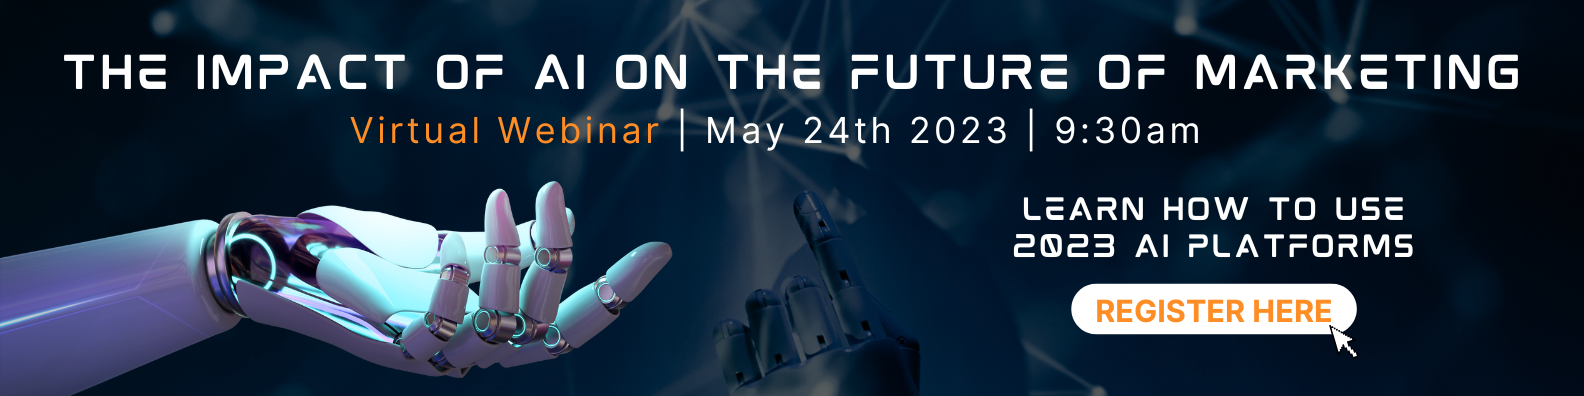 Linked image to register for IQnection's Webinar on May 24th, 2023 at 9:30 AM.